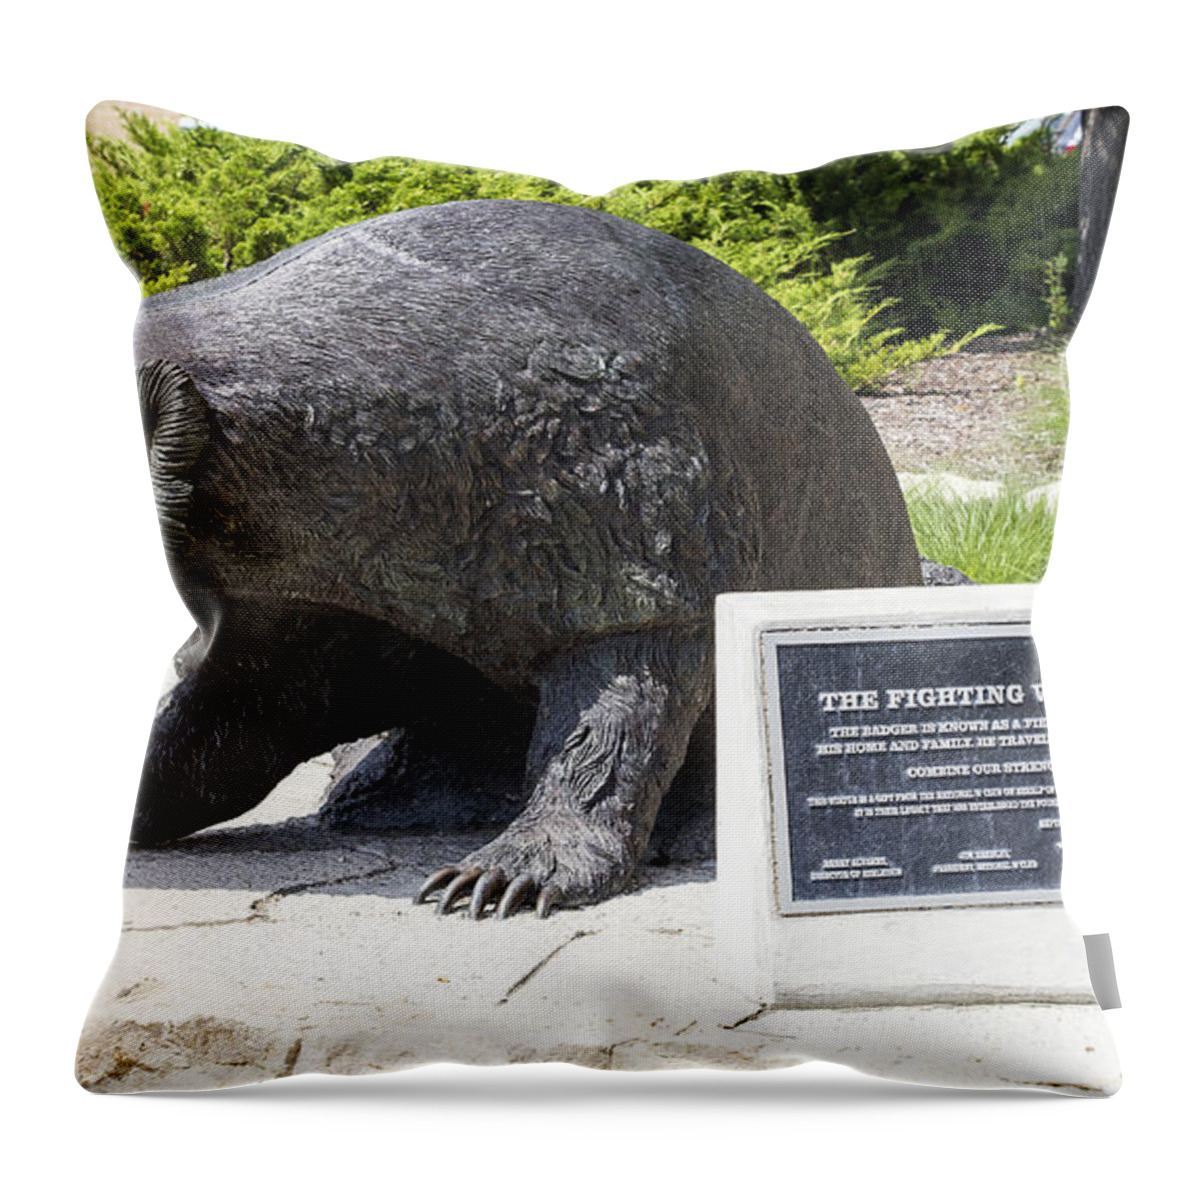 Badger Throw Pillow featuring the photograph Fighting Badger - UW Madison - Wisconsin by Steven Ralser